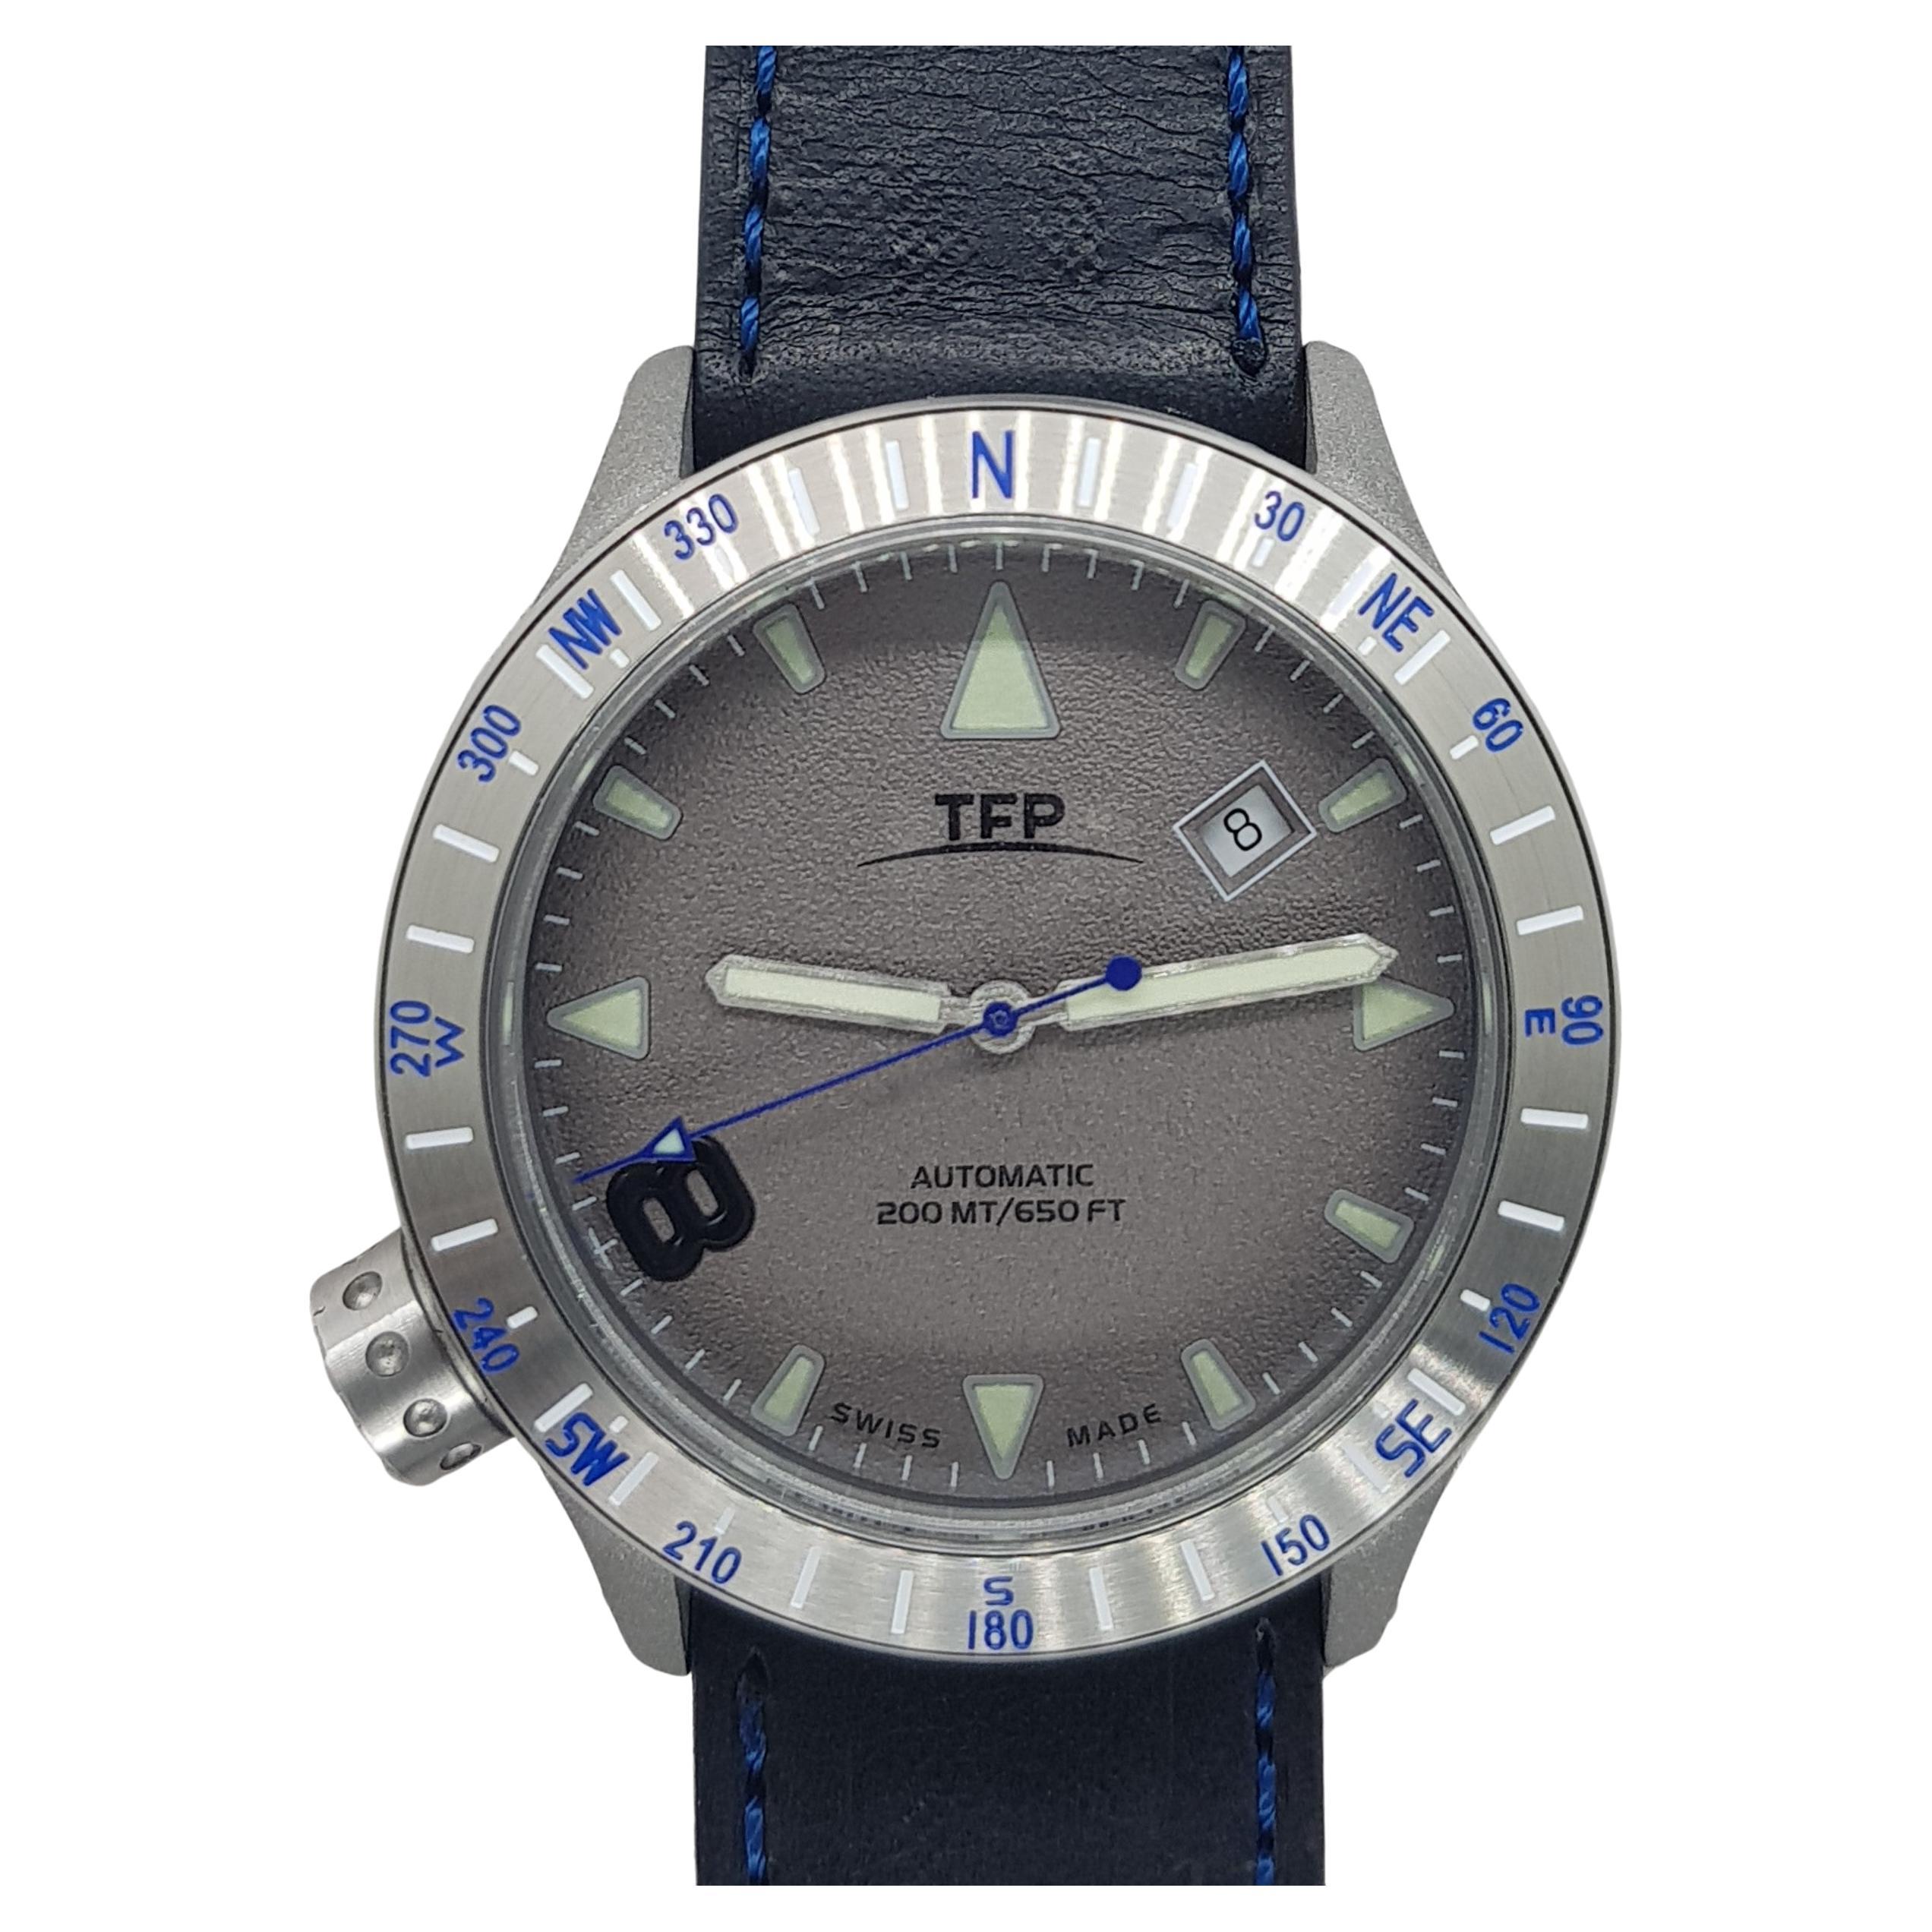 WINDROSE TOTAL DARK BLUE  is a 3 hands watch, with fixed  steel ring bezel,  diameter 42.5 mm , thickness 13.8 mm  case.
The case is casted  in AISI 316L steel , matted, full OxB ( carrure & Bezel); screwed back case, with bas-relief.
Domed dial, 